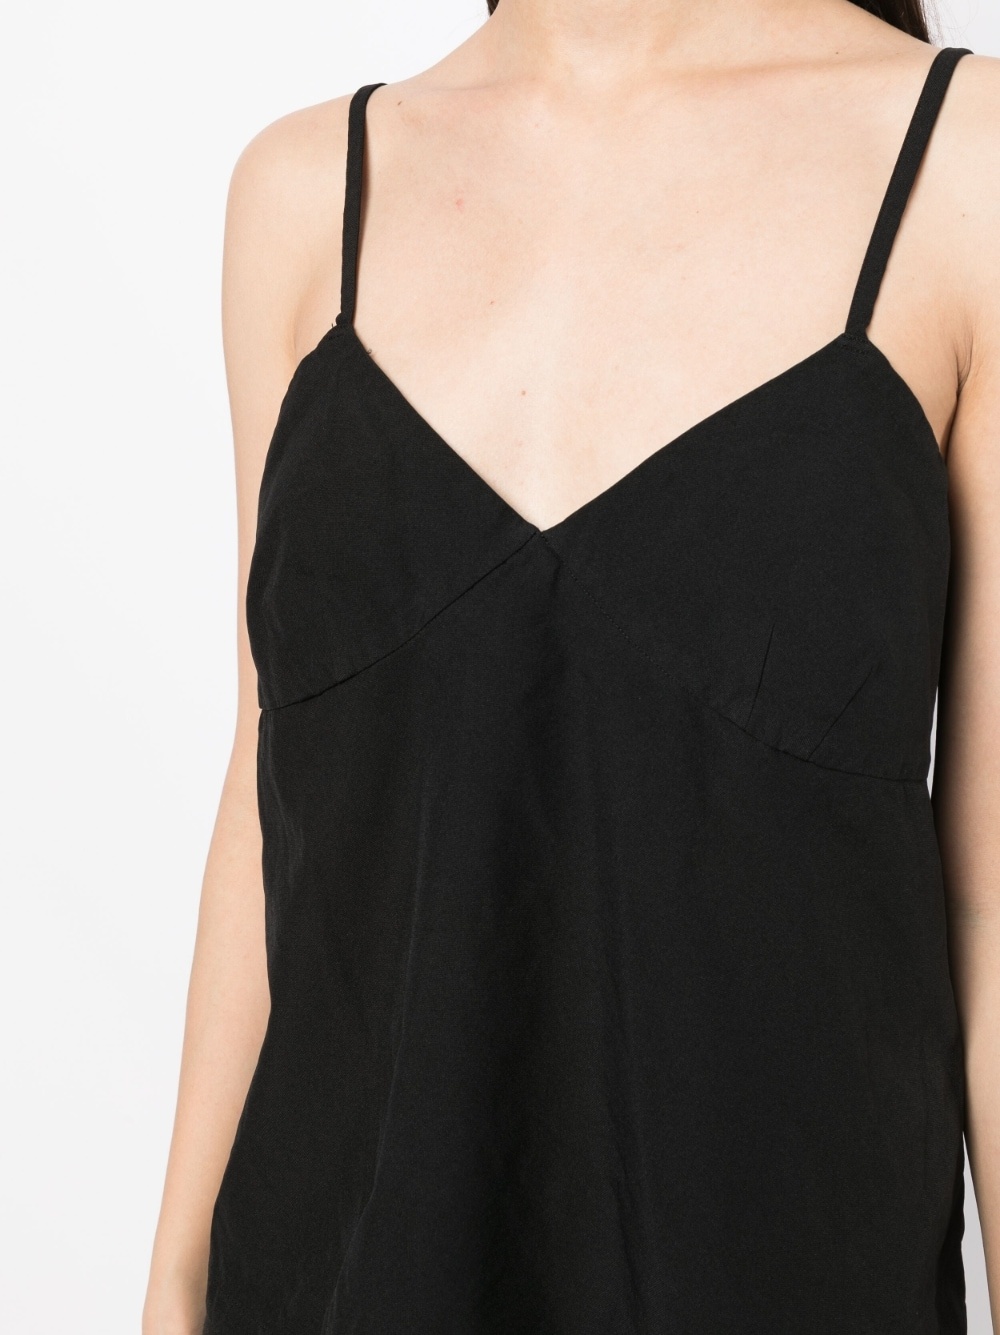 V-neck camisole top - 5